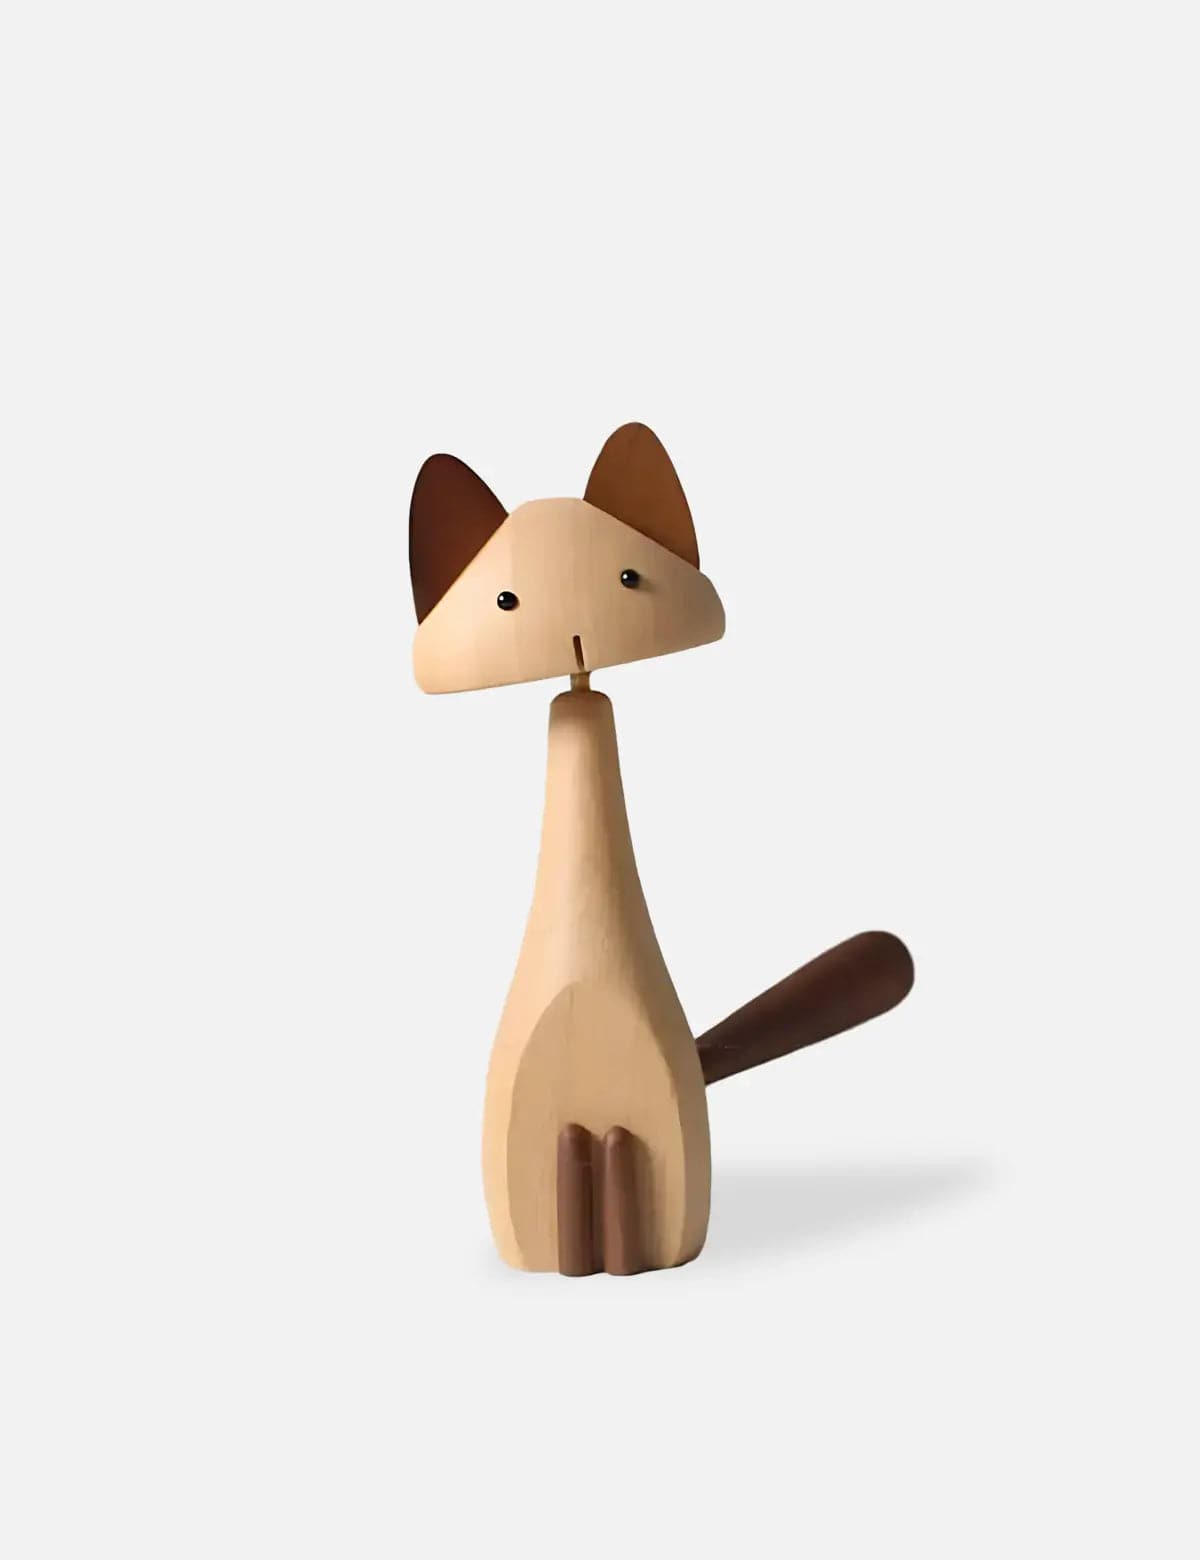 artisan-wood-cat-statue-home-accent-10